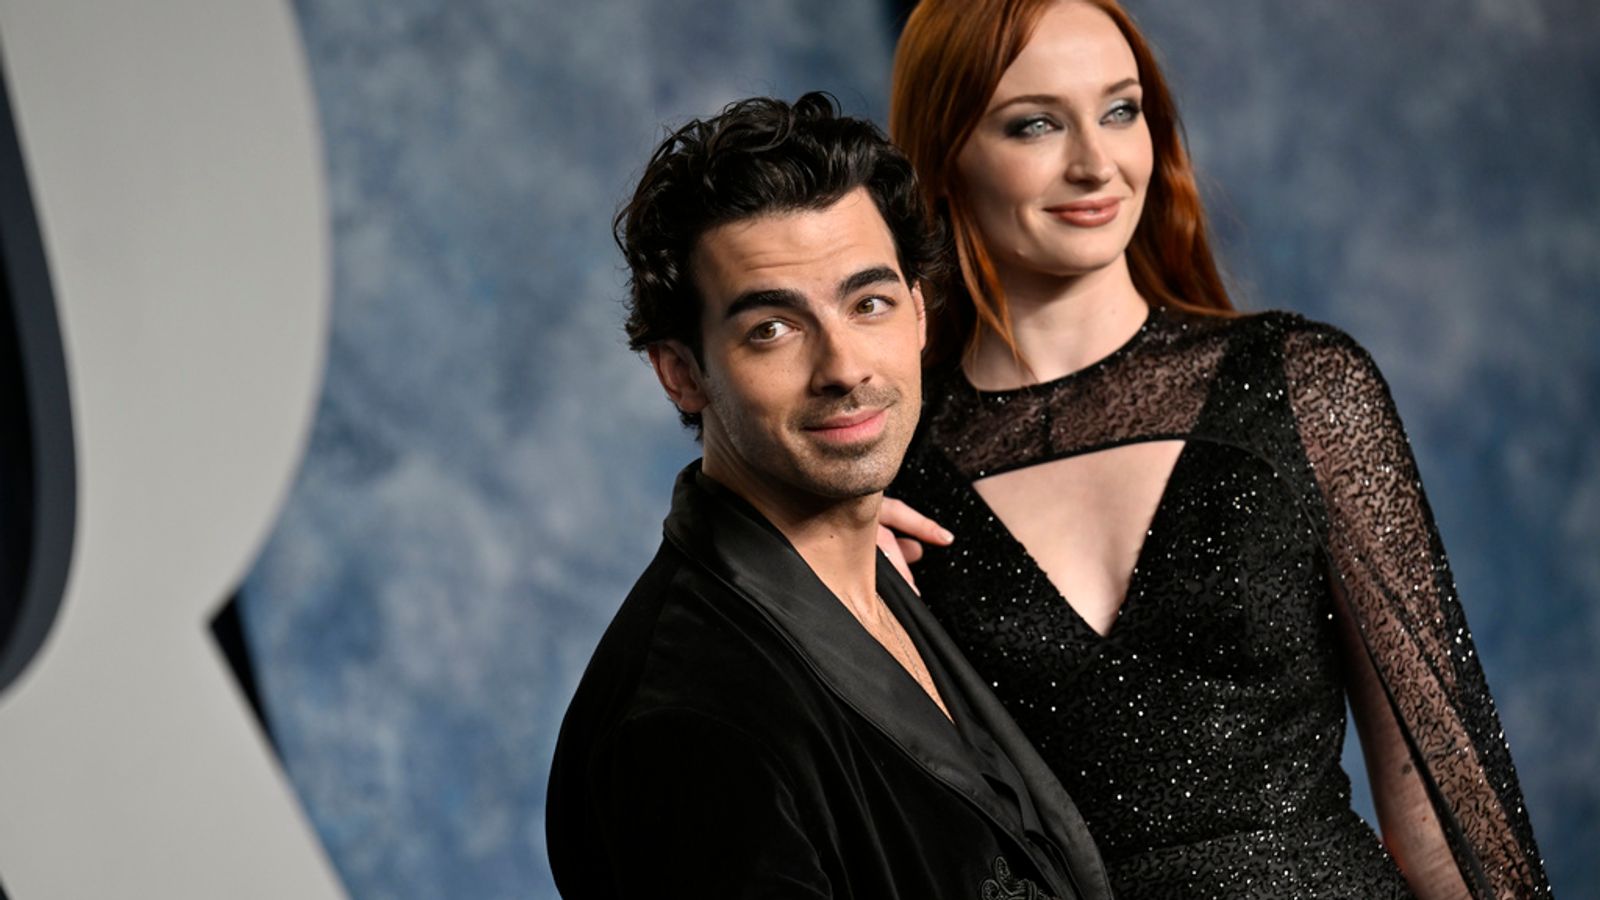 Joe Jonas files for divorce from Sophie Turner, reportedly calling their marriage ‘irretrievably broken’ | Ents & Arts News